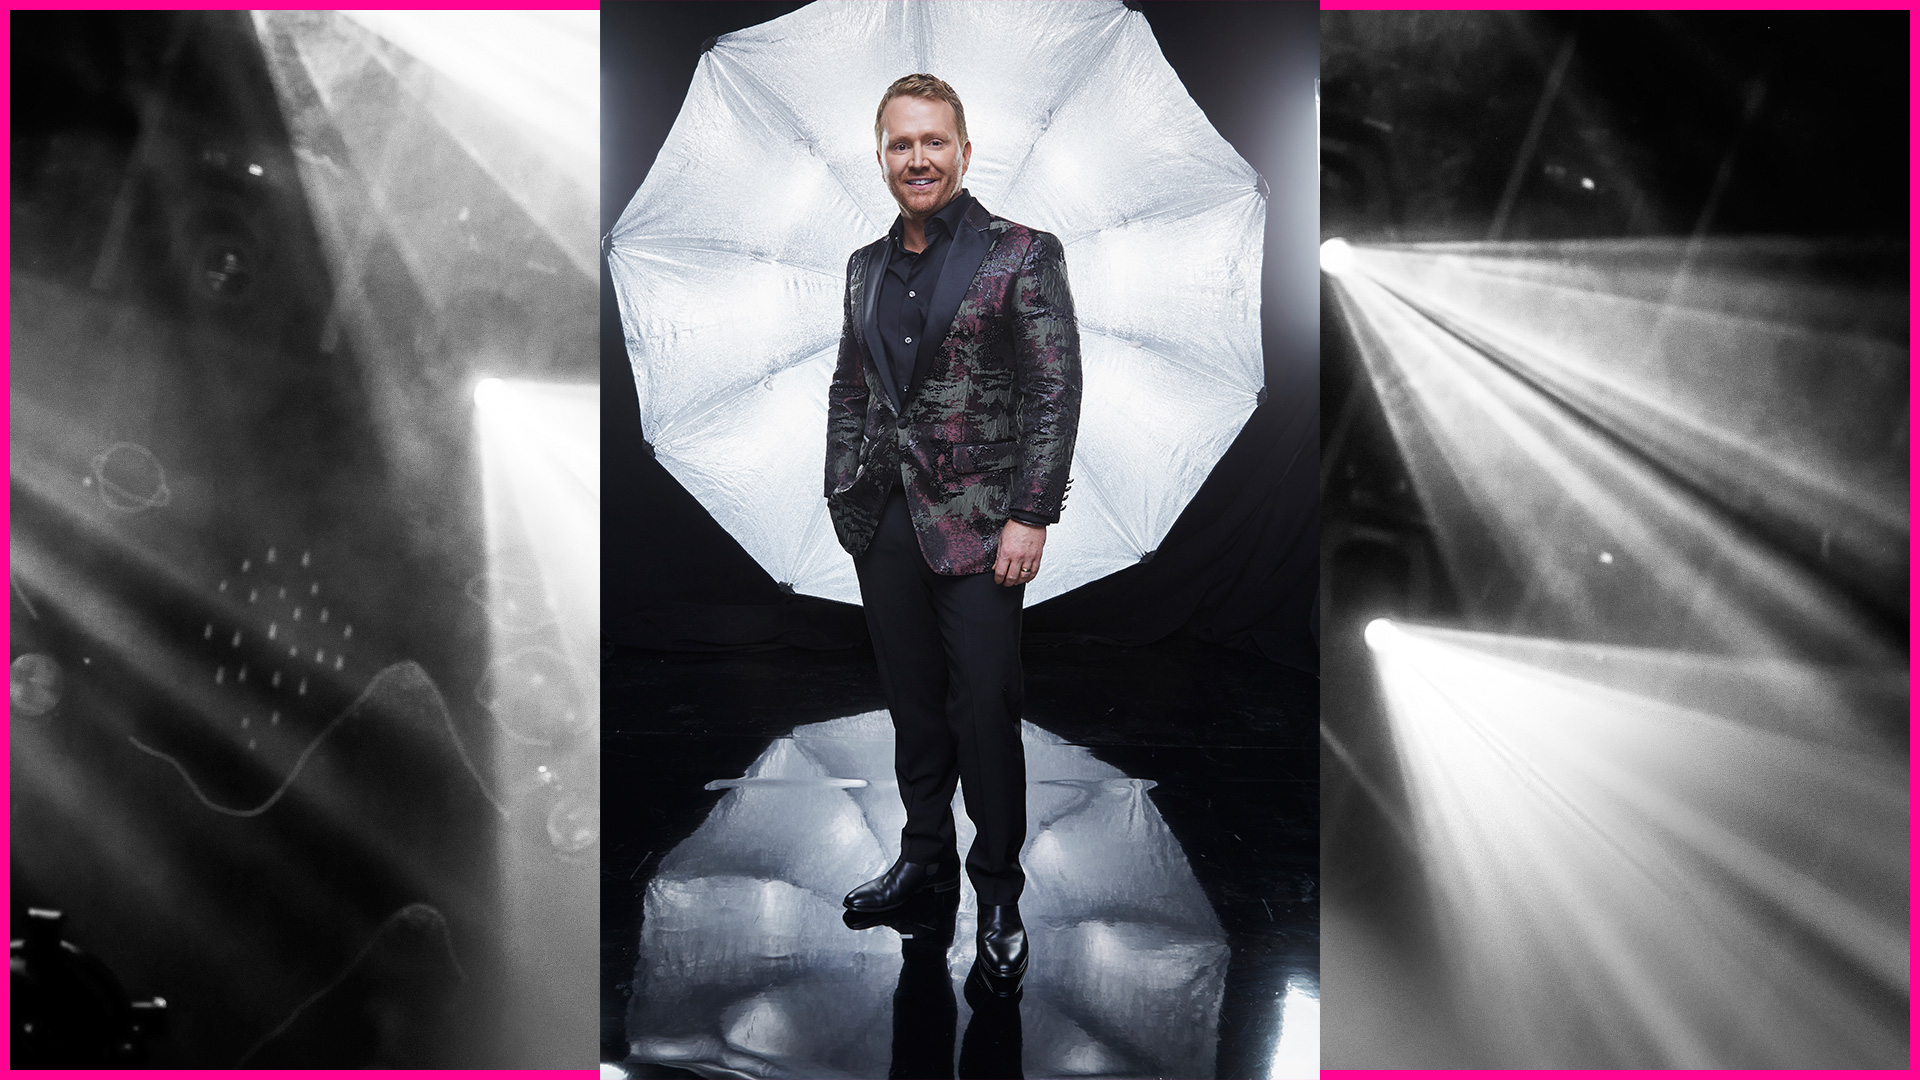 Singer/songwriter Shane McAnally is one class act backstage at the 52nd ACM Awards.